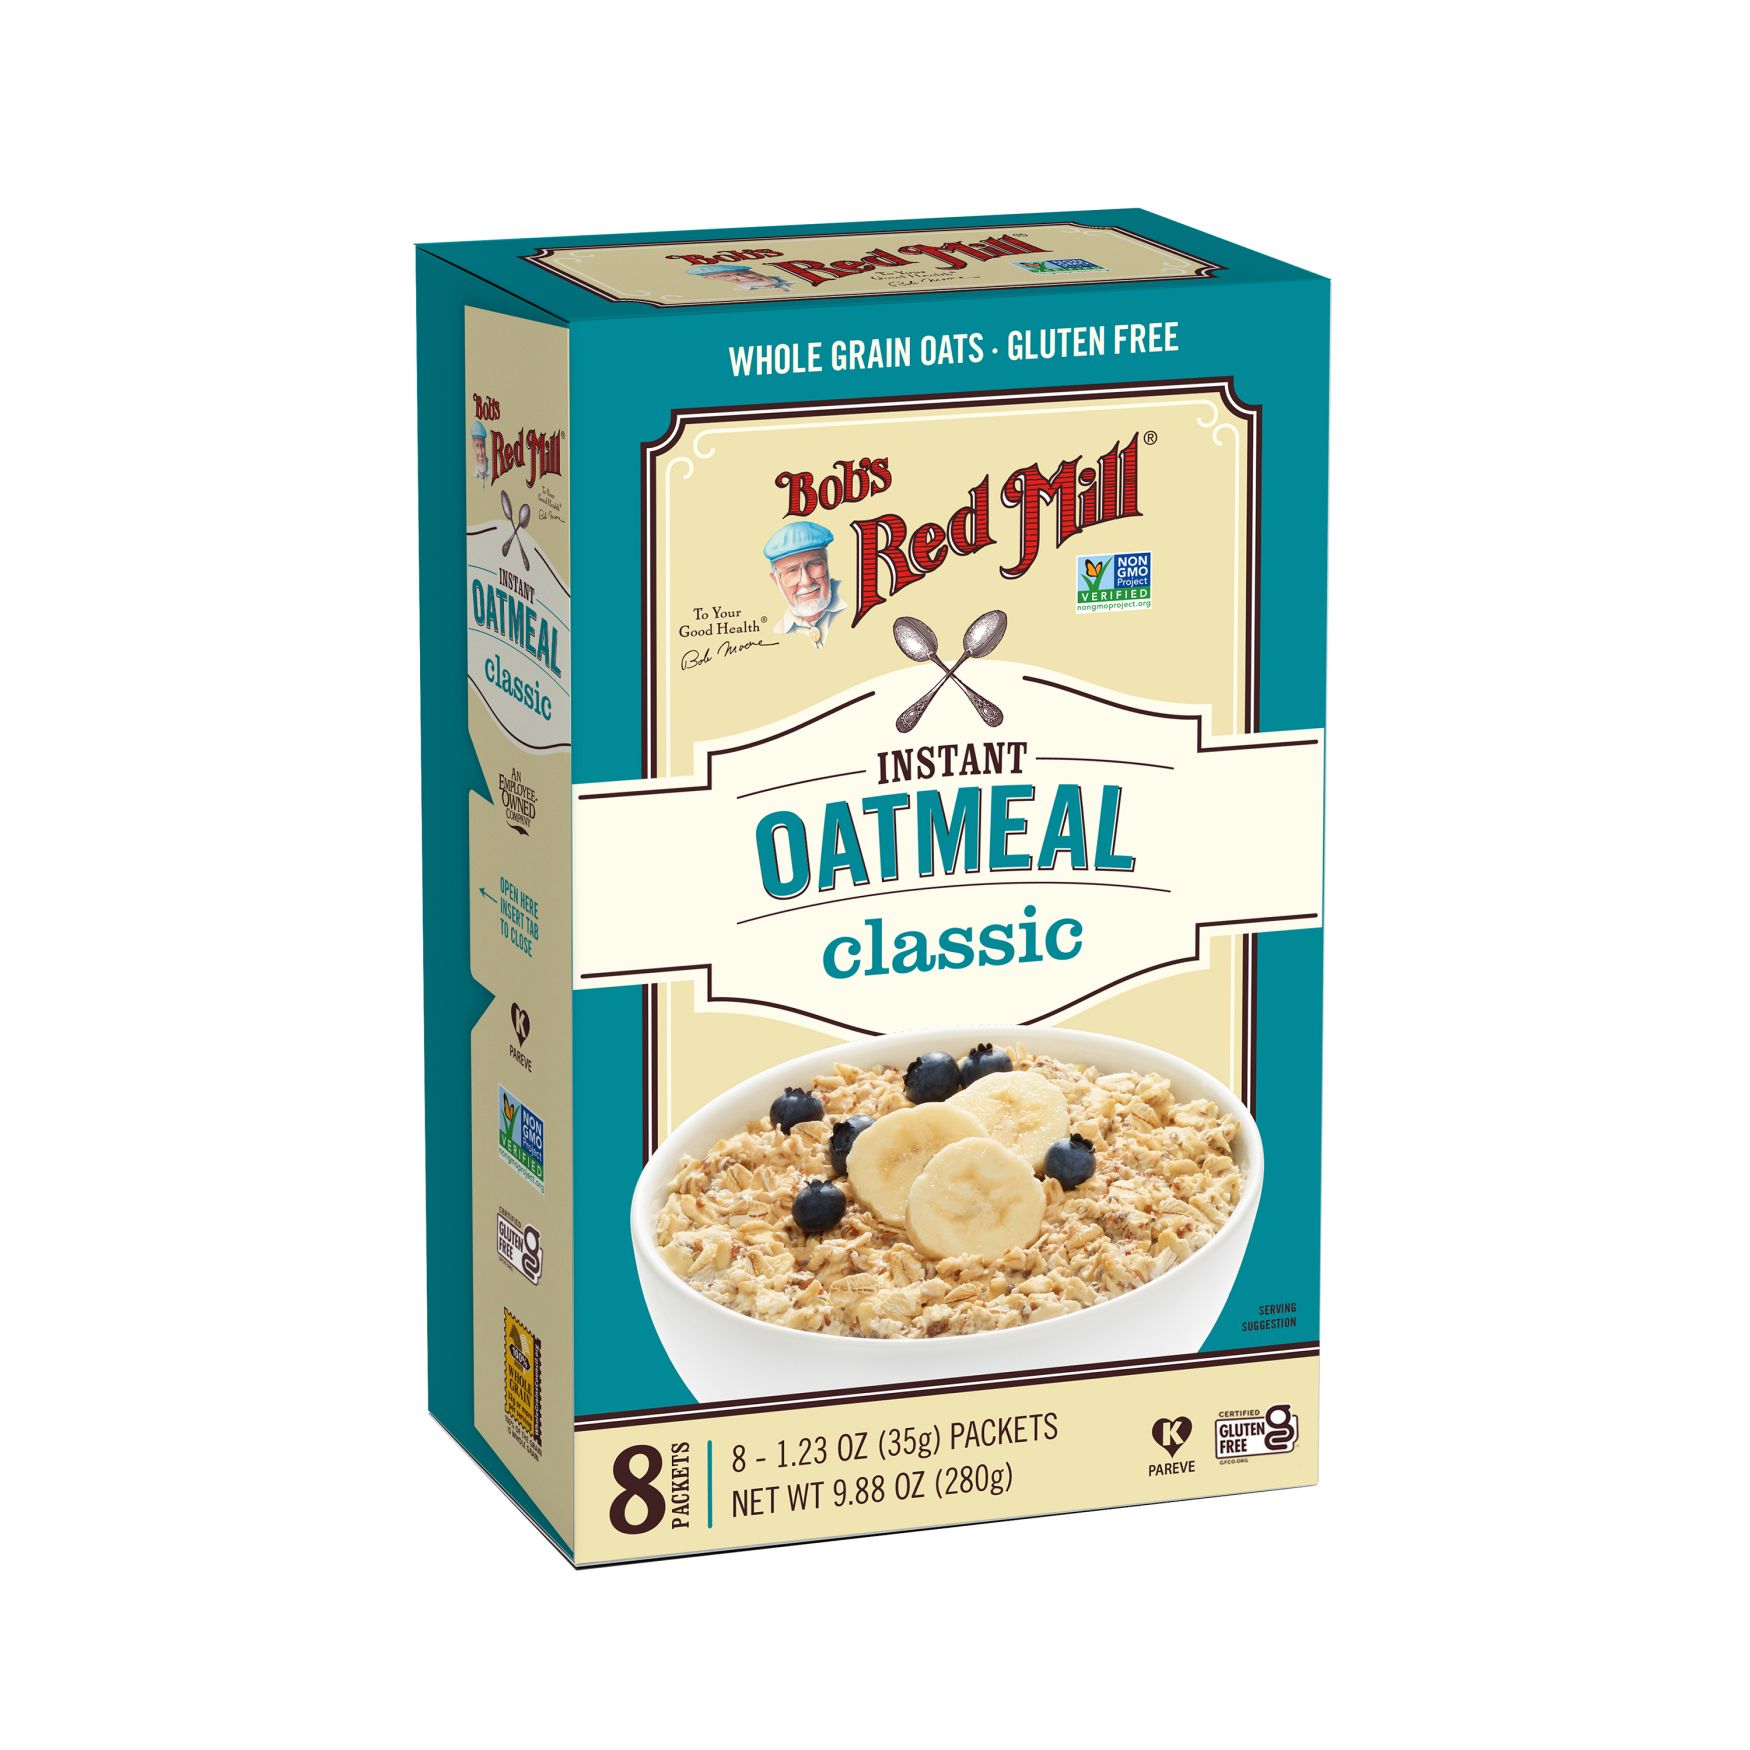 Quaker Instant Oatmeal, USDA Organic, Non-GMO Project Verified, Original,  Individual Packets, 8 Count (Pack of 6)